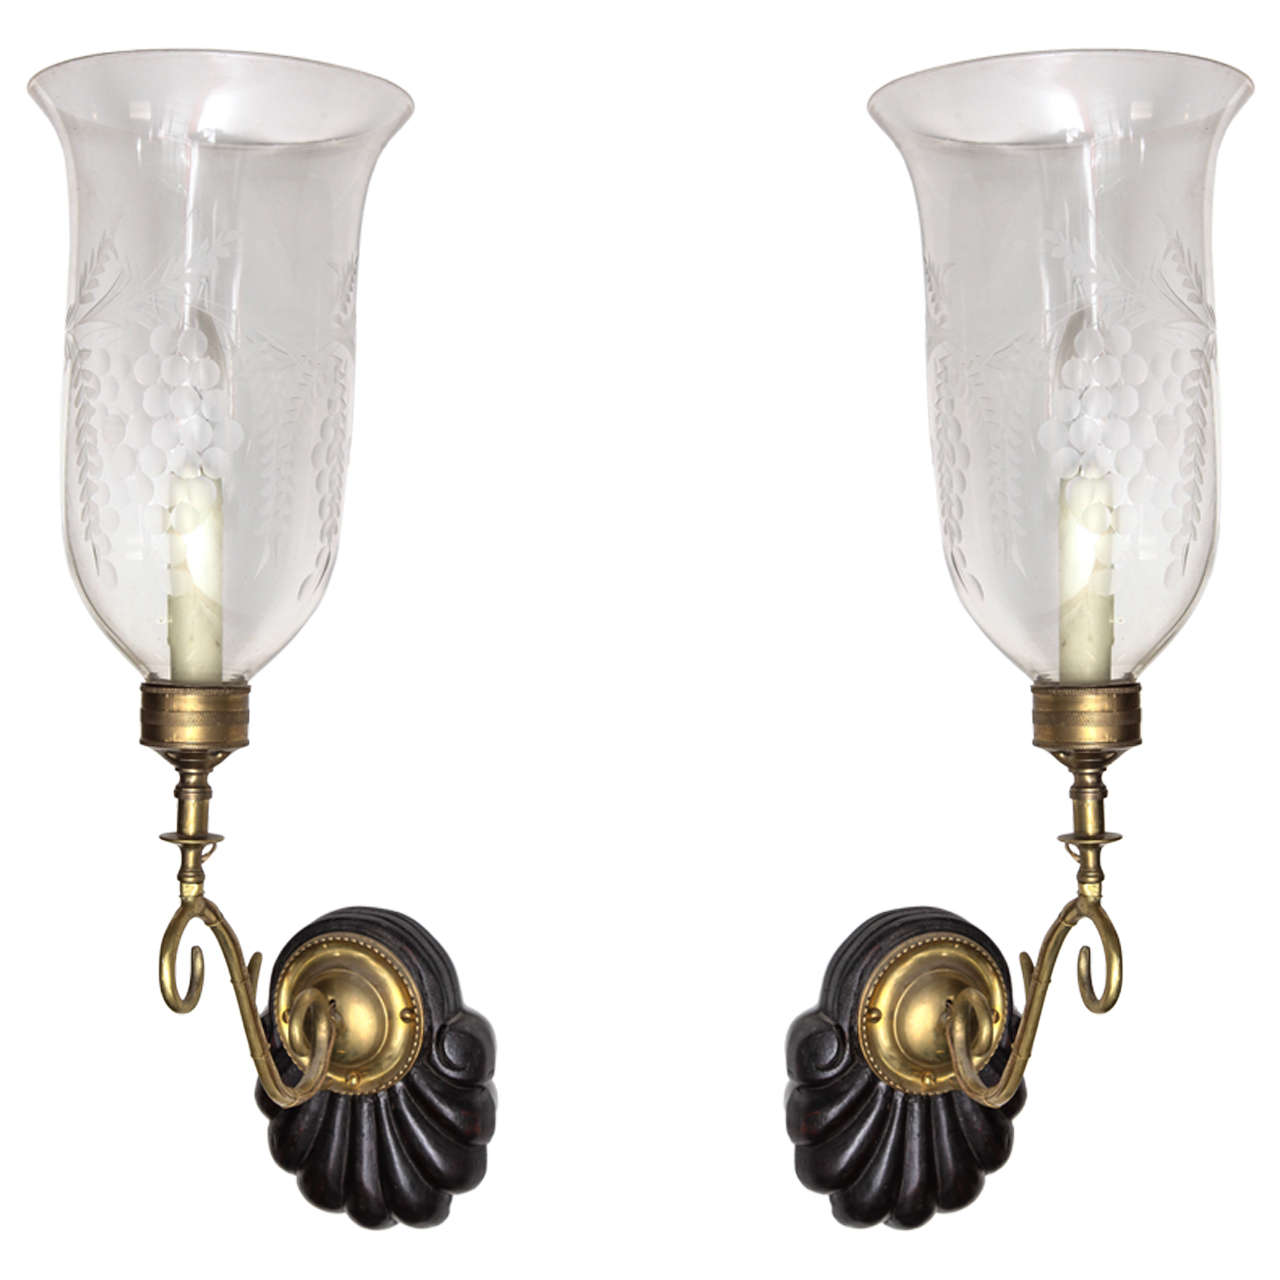 Pair of Vintage Brass and Wood Sconces with Etched Glass Hurricane Shades